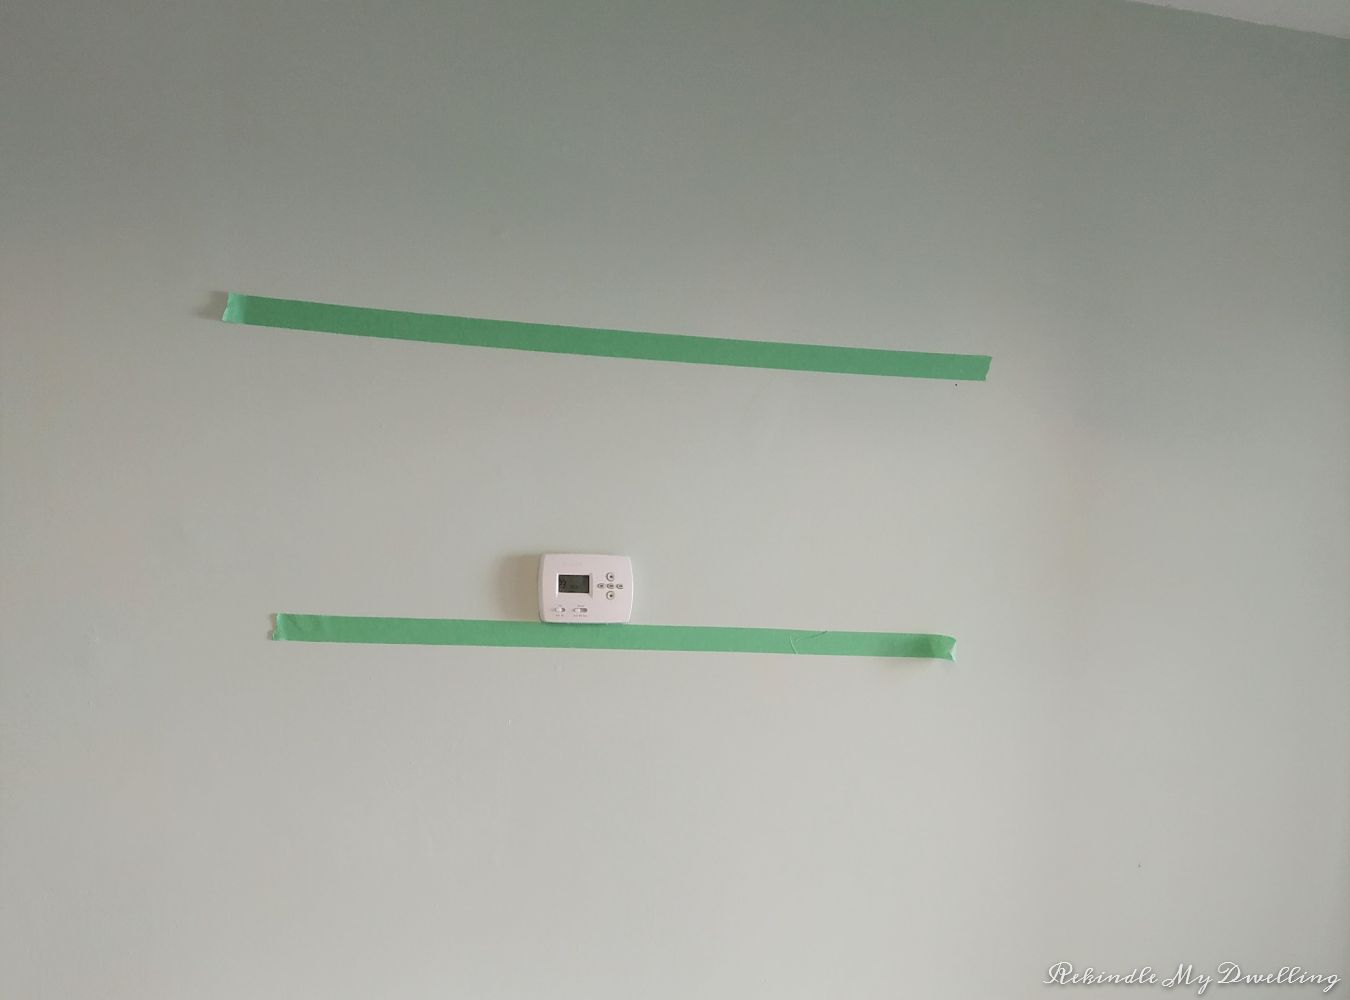 Painters tape on the wall.